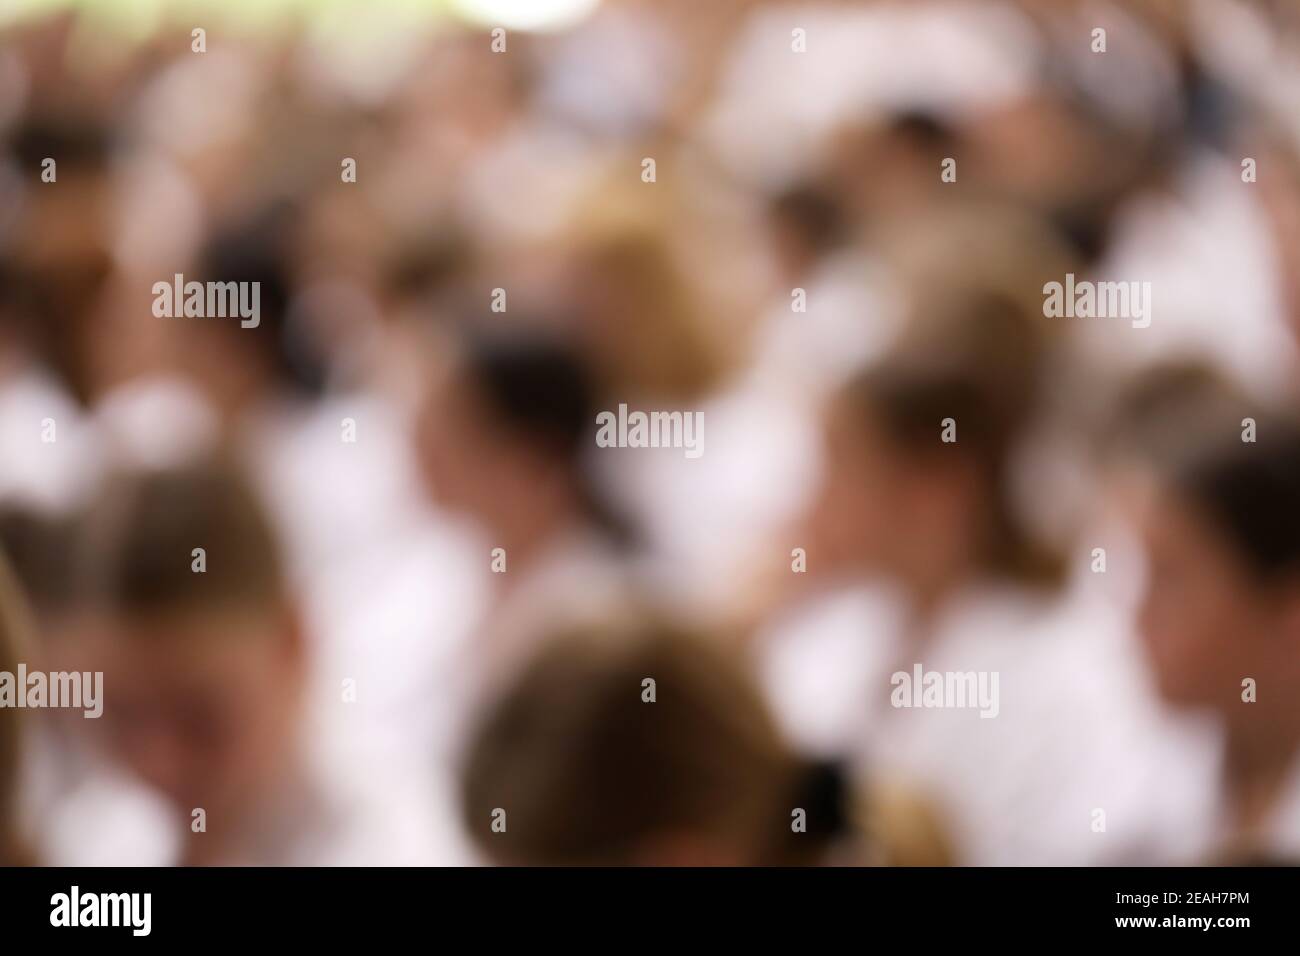 A deliberate artistic blurry shot of a large group of blurred people all wearing white shirts facing, sitting or walking in the same direction Stock Photo